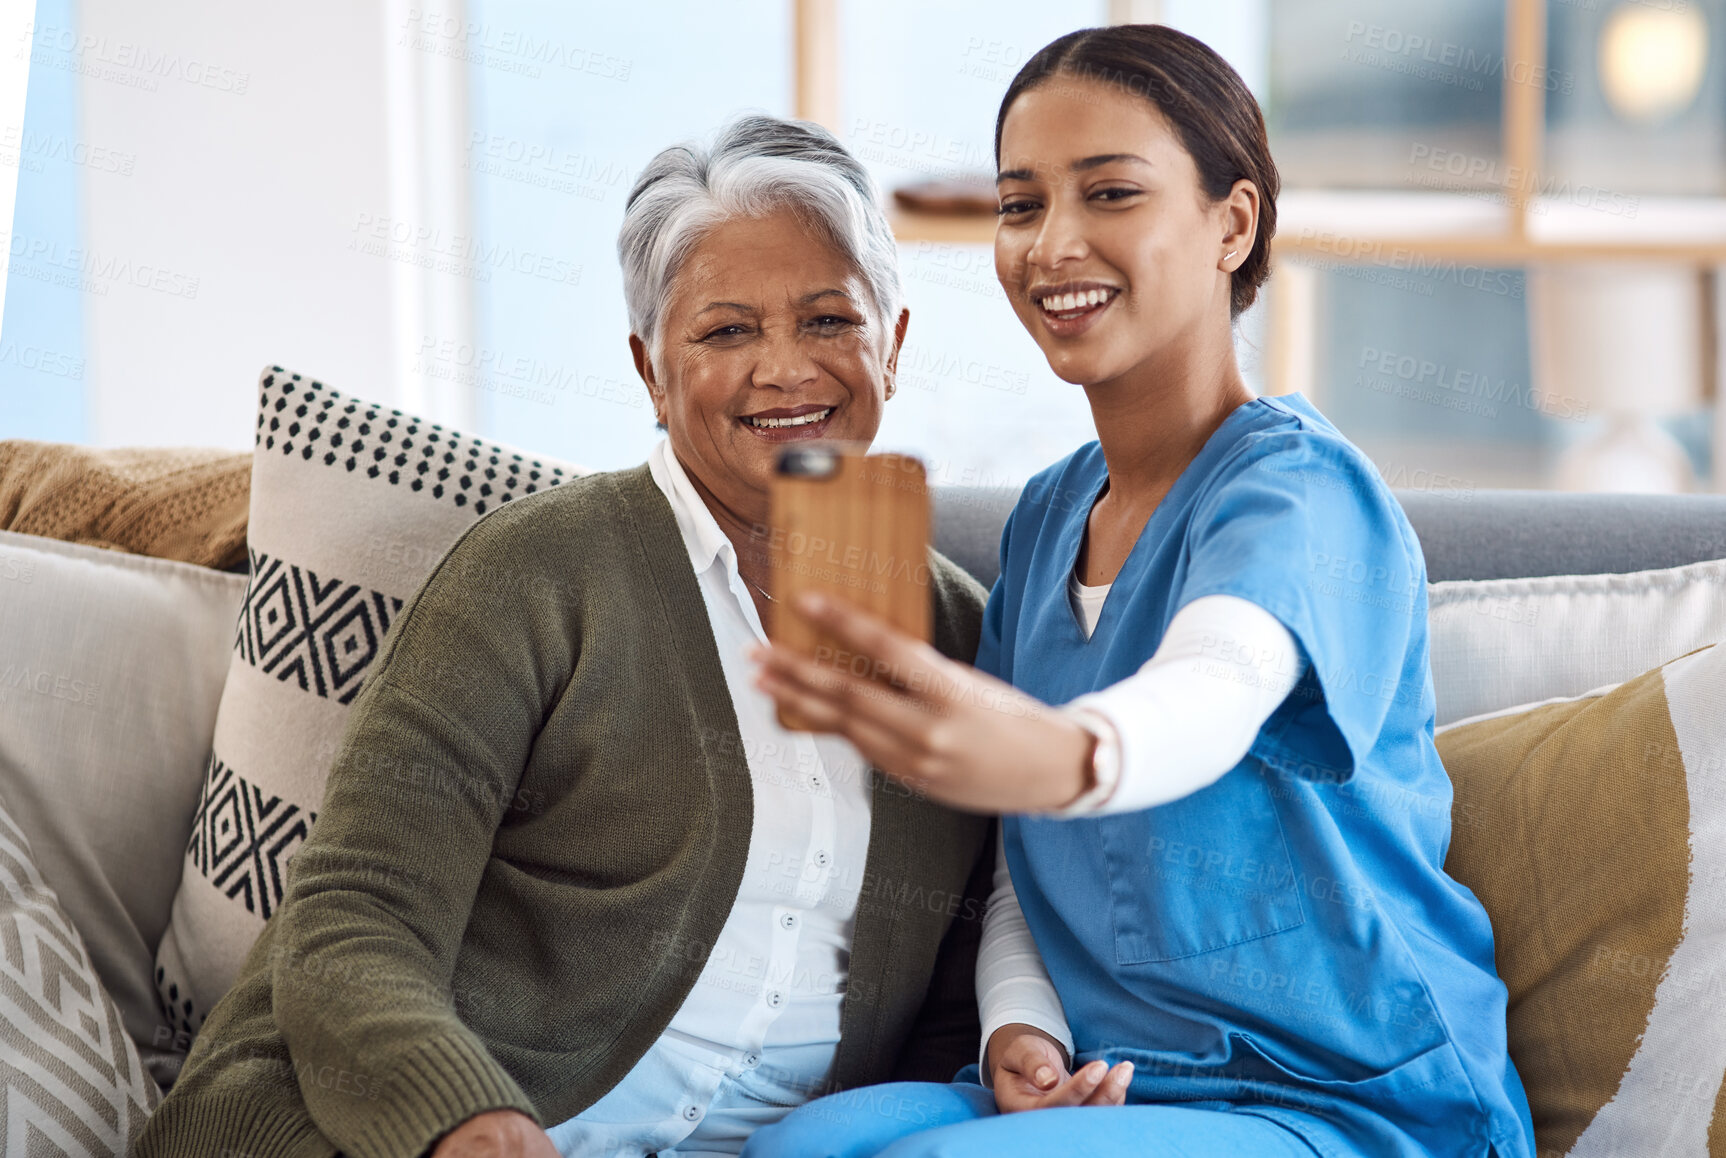 Buy stock photo Caregiver, selfie or old woman in nursing home with smile or happiness for profile pictures or retirement. Women, photography or happy nurse relaxing or smiling with elderly patient for wellness 